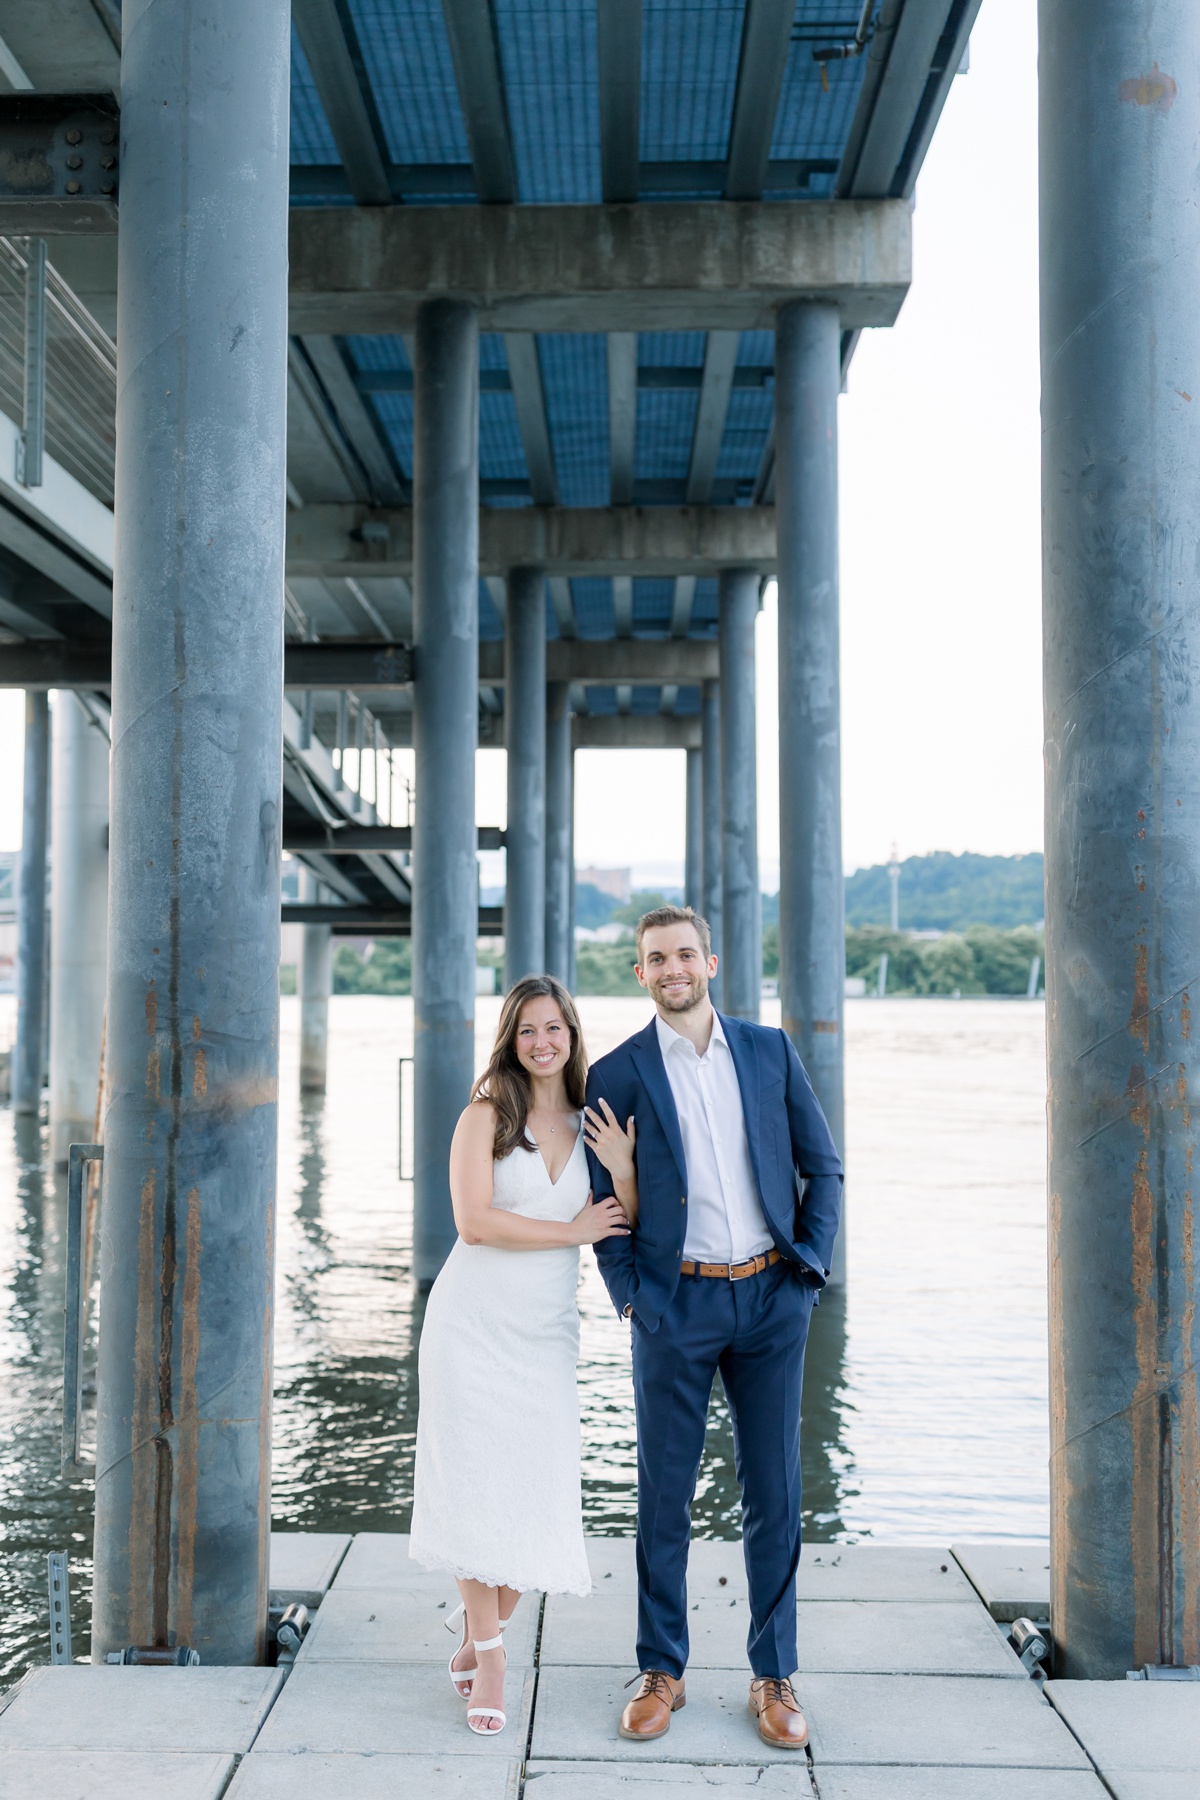 chattanooga engagement photo locations by wedding photographer alyssa rachelle photography